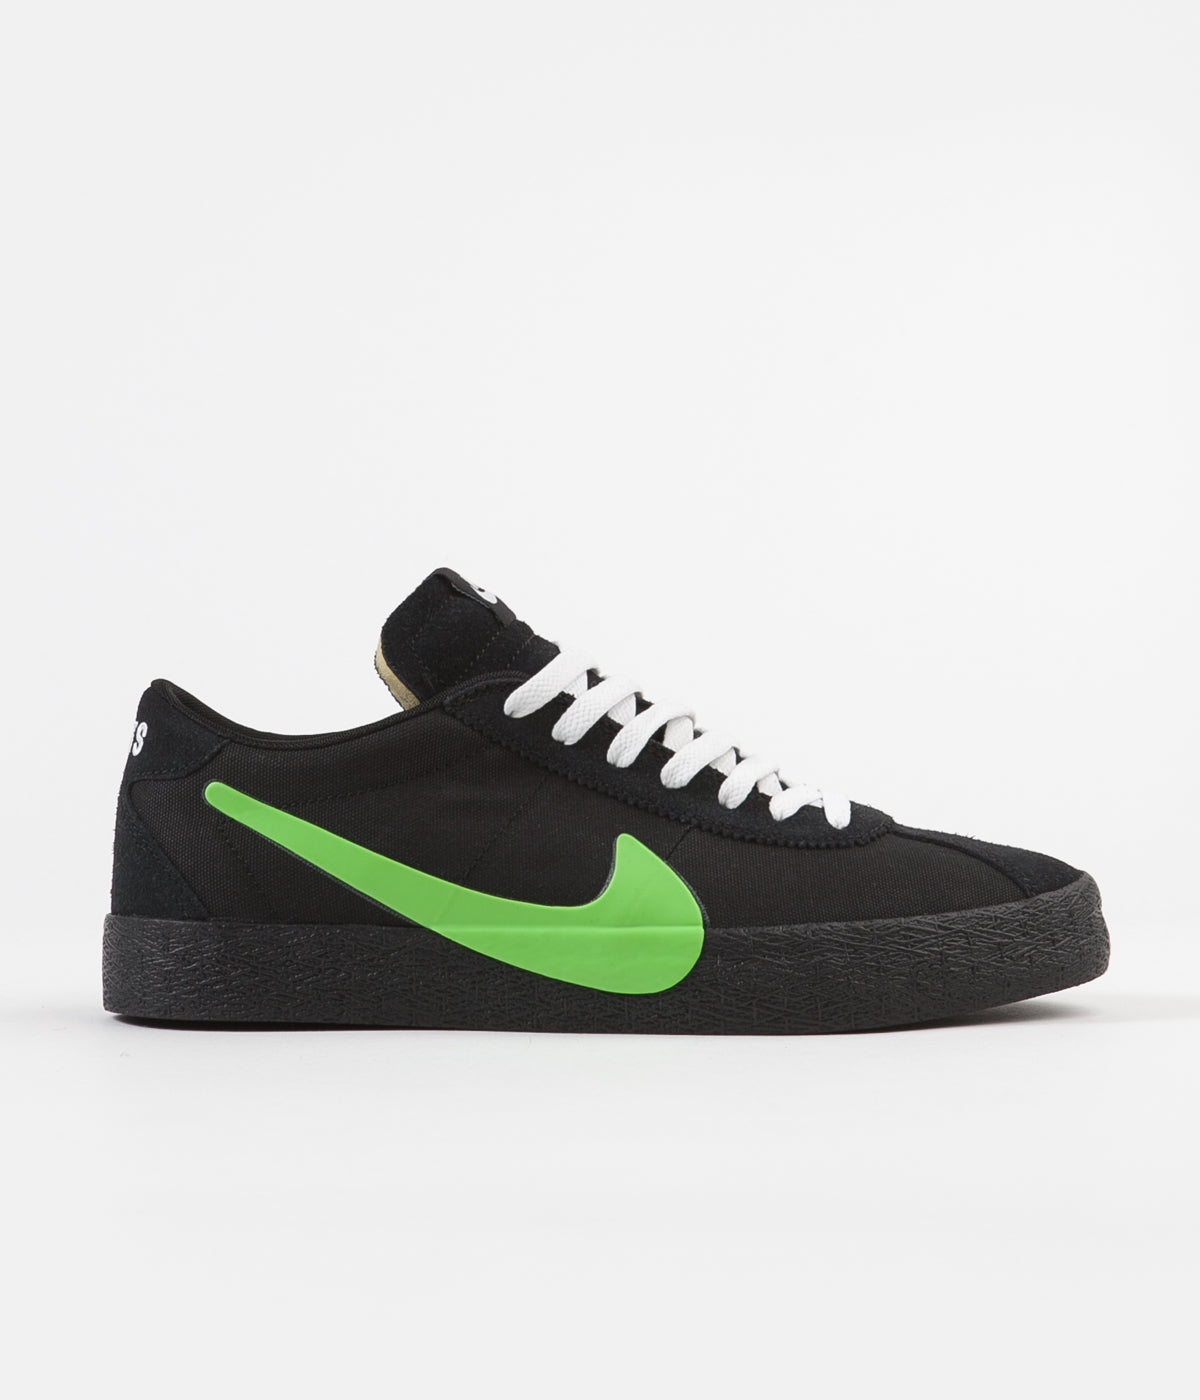 green and black nike shoes